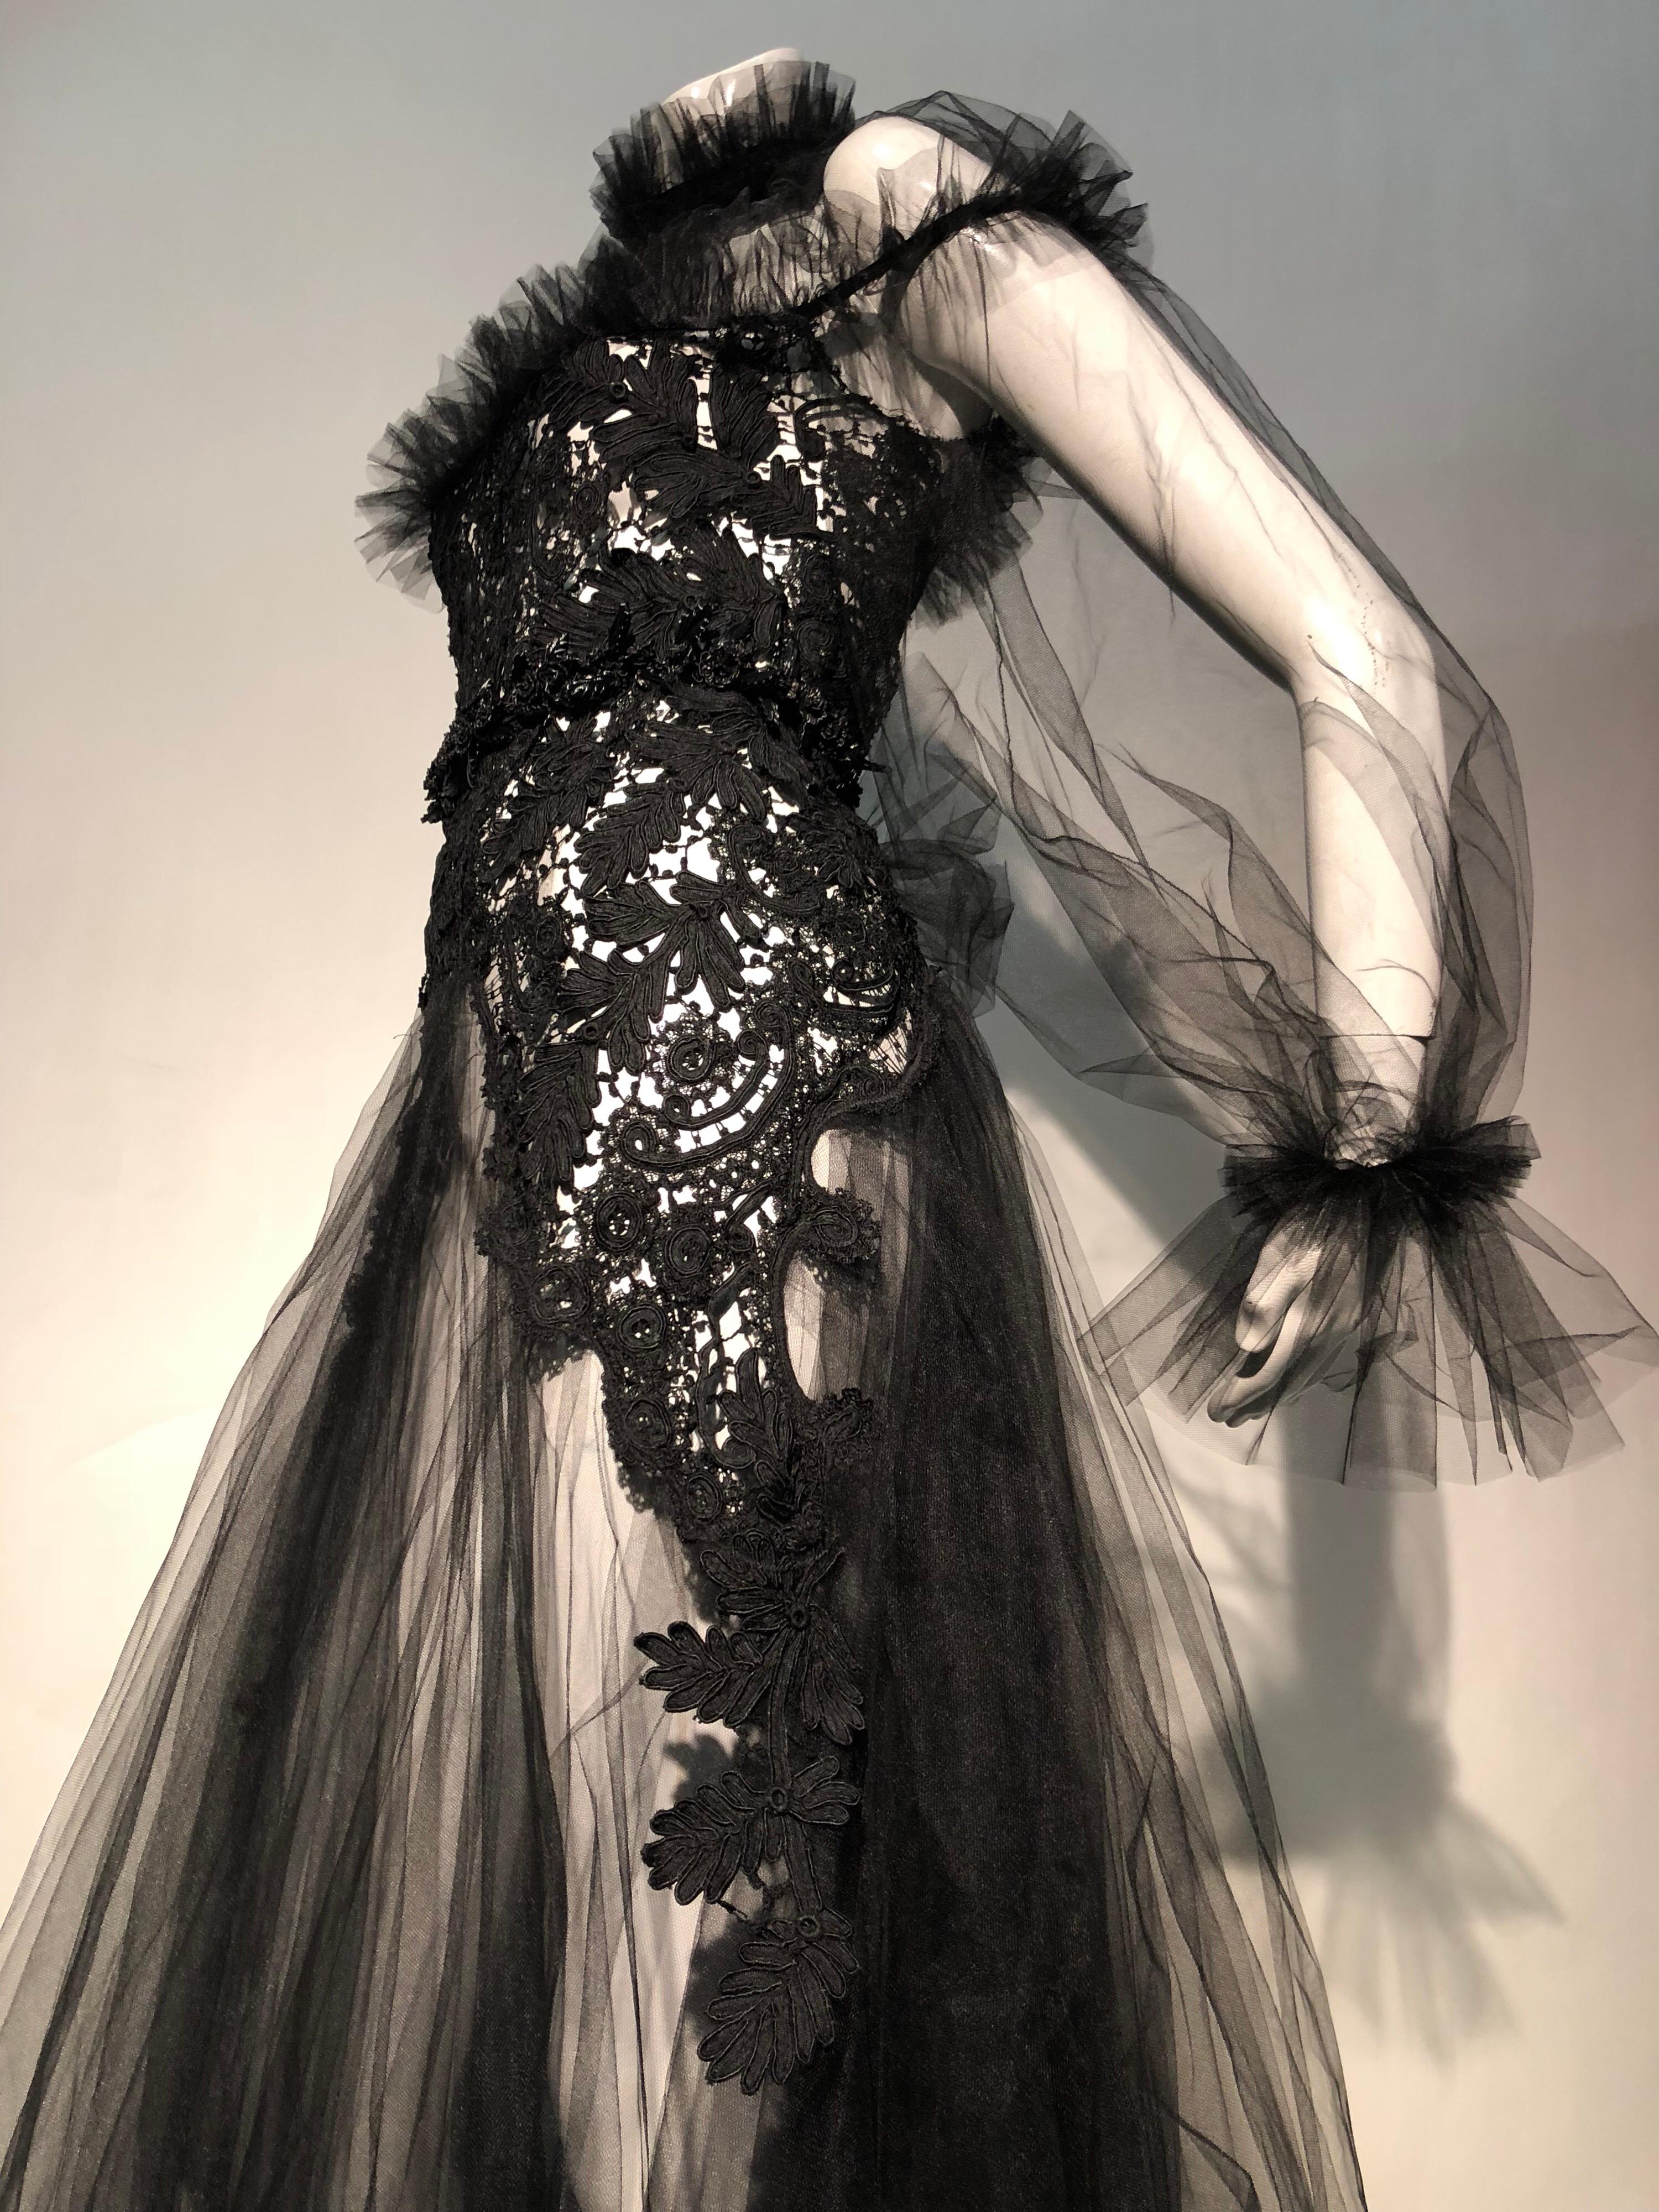 Torso Creations, Victorian hand-made cord lace and tulle are paired in a high collar goth-style gown with sash. Be as daring as you like in this whirl of diaphanous tulle. Ruffles frame the neck decolletage and full skirt in the extraordinarily